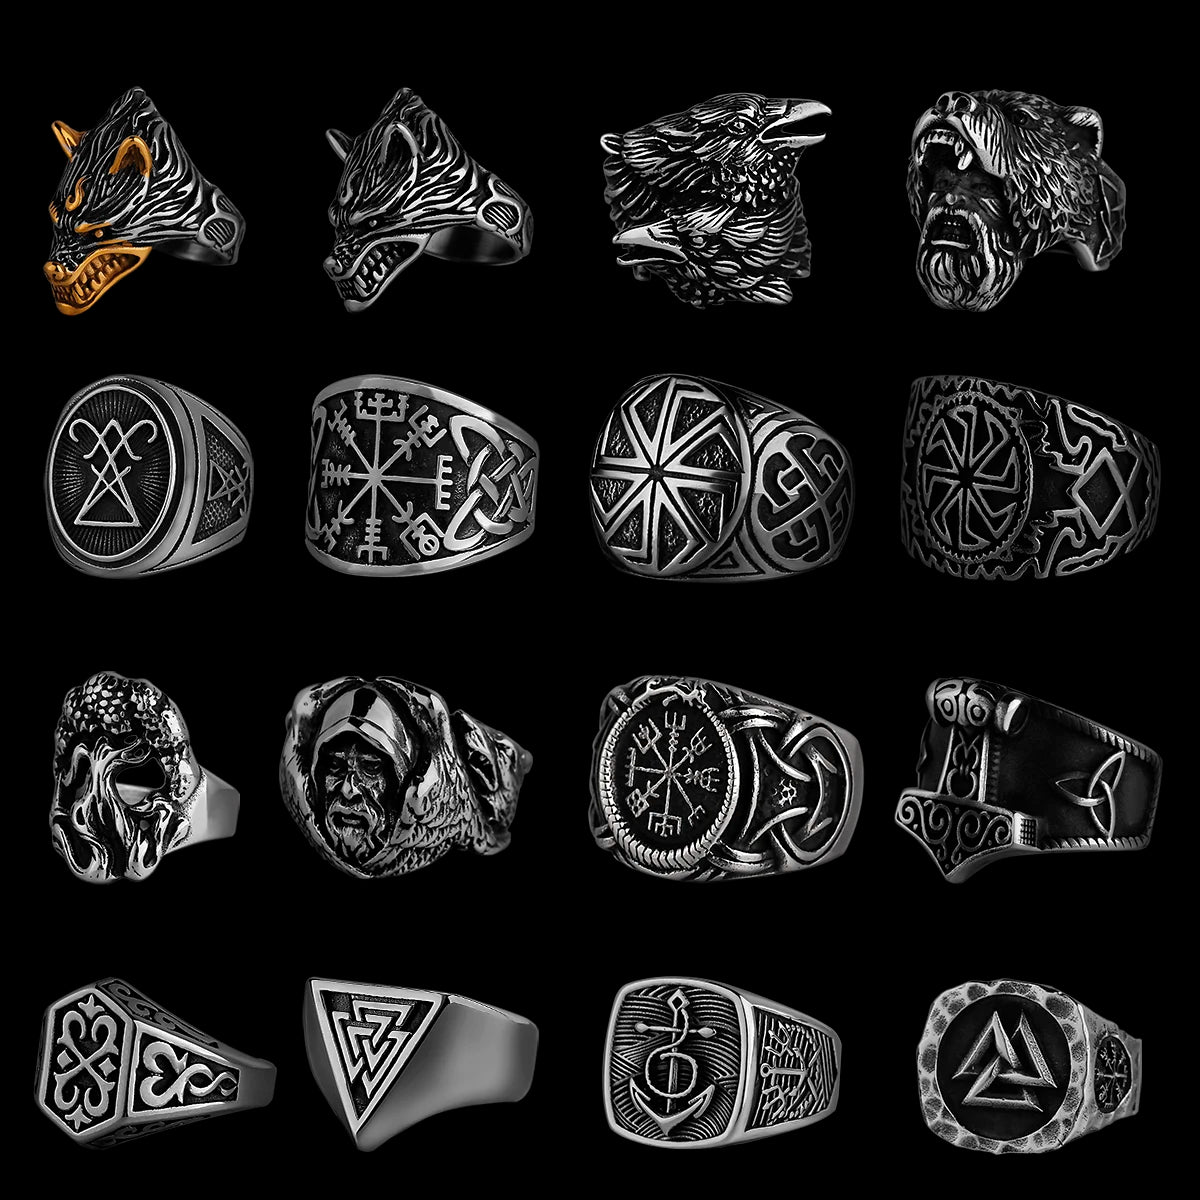 Nordic Viking Stainless Steel Ring - Anchor Compass Tree of Life Rune Amulet Wolf Finger Jewelry Men's Rings